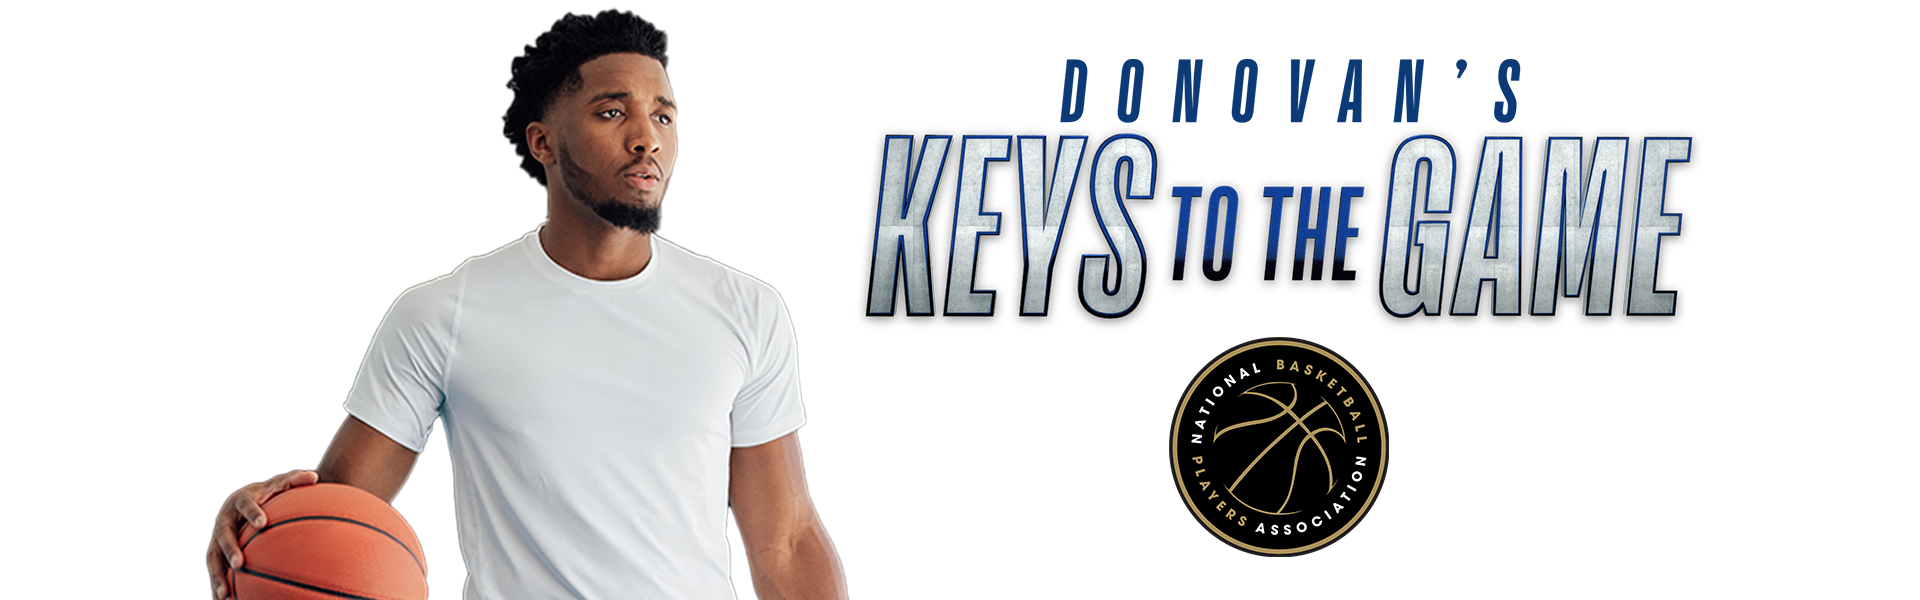 keys to the game banner